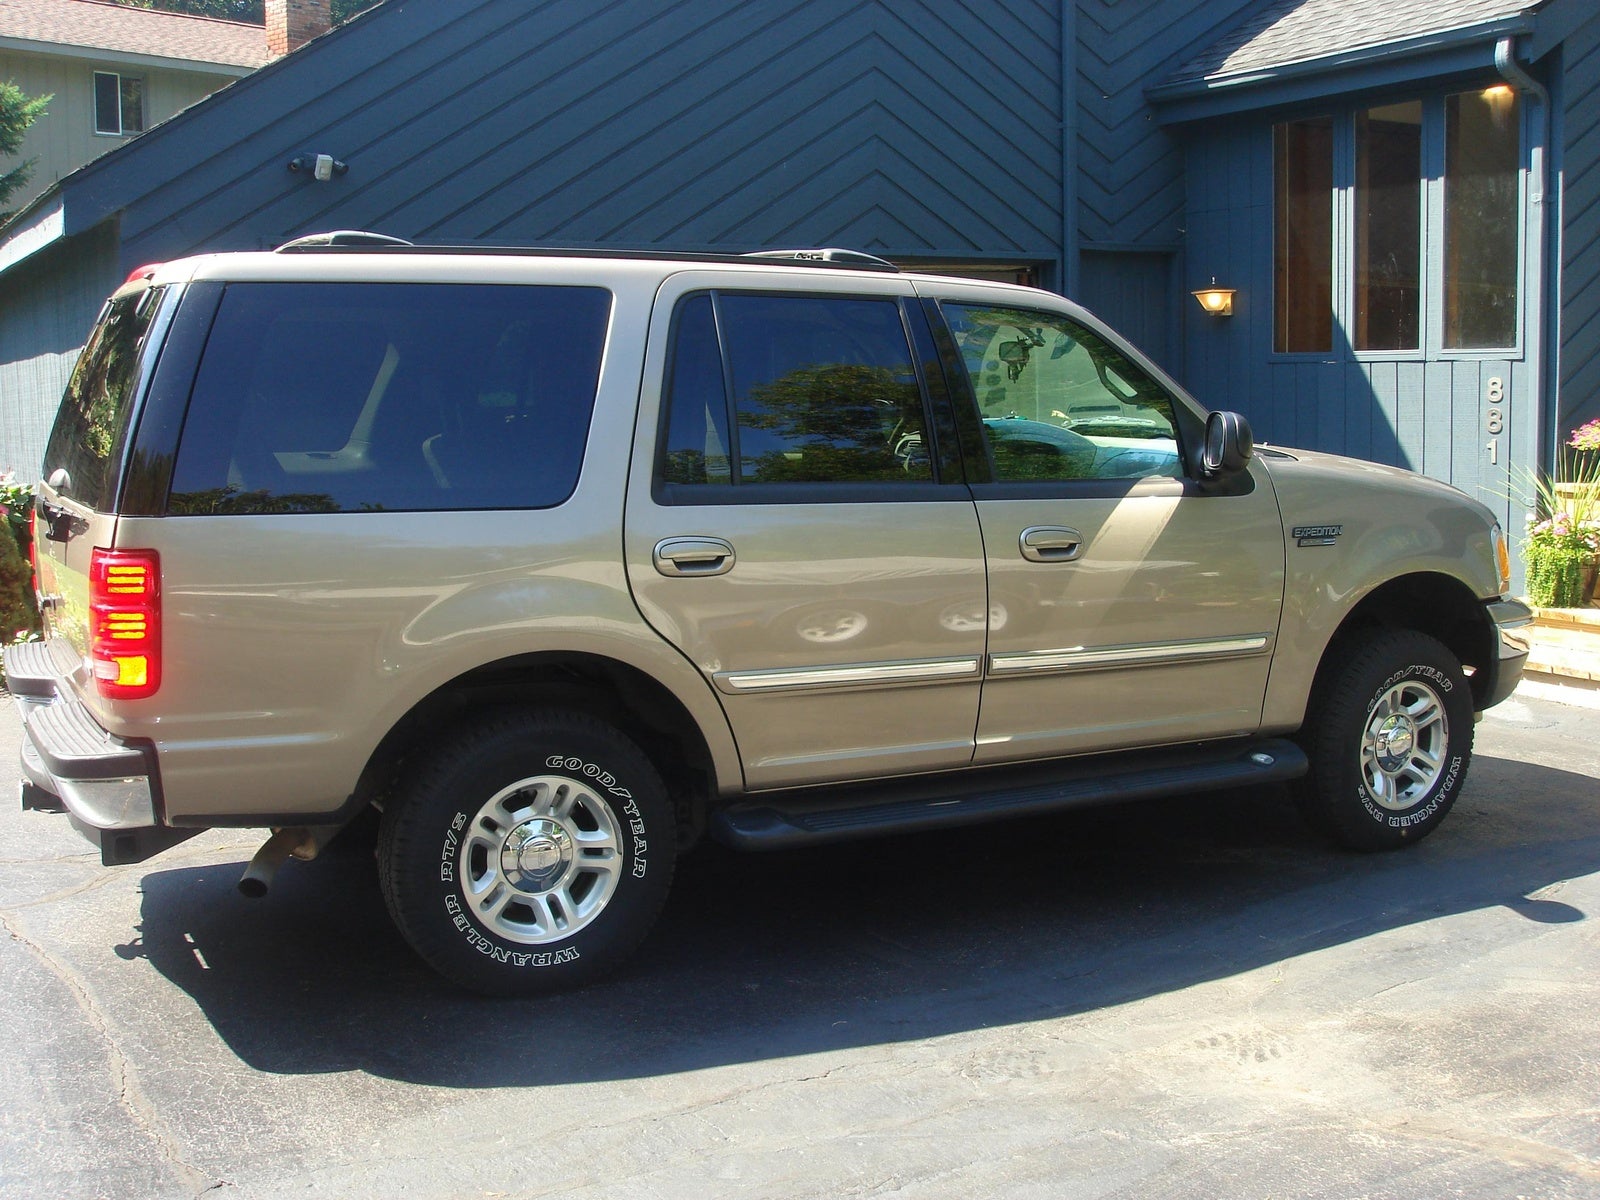 2001 Ford excursion manual download